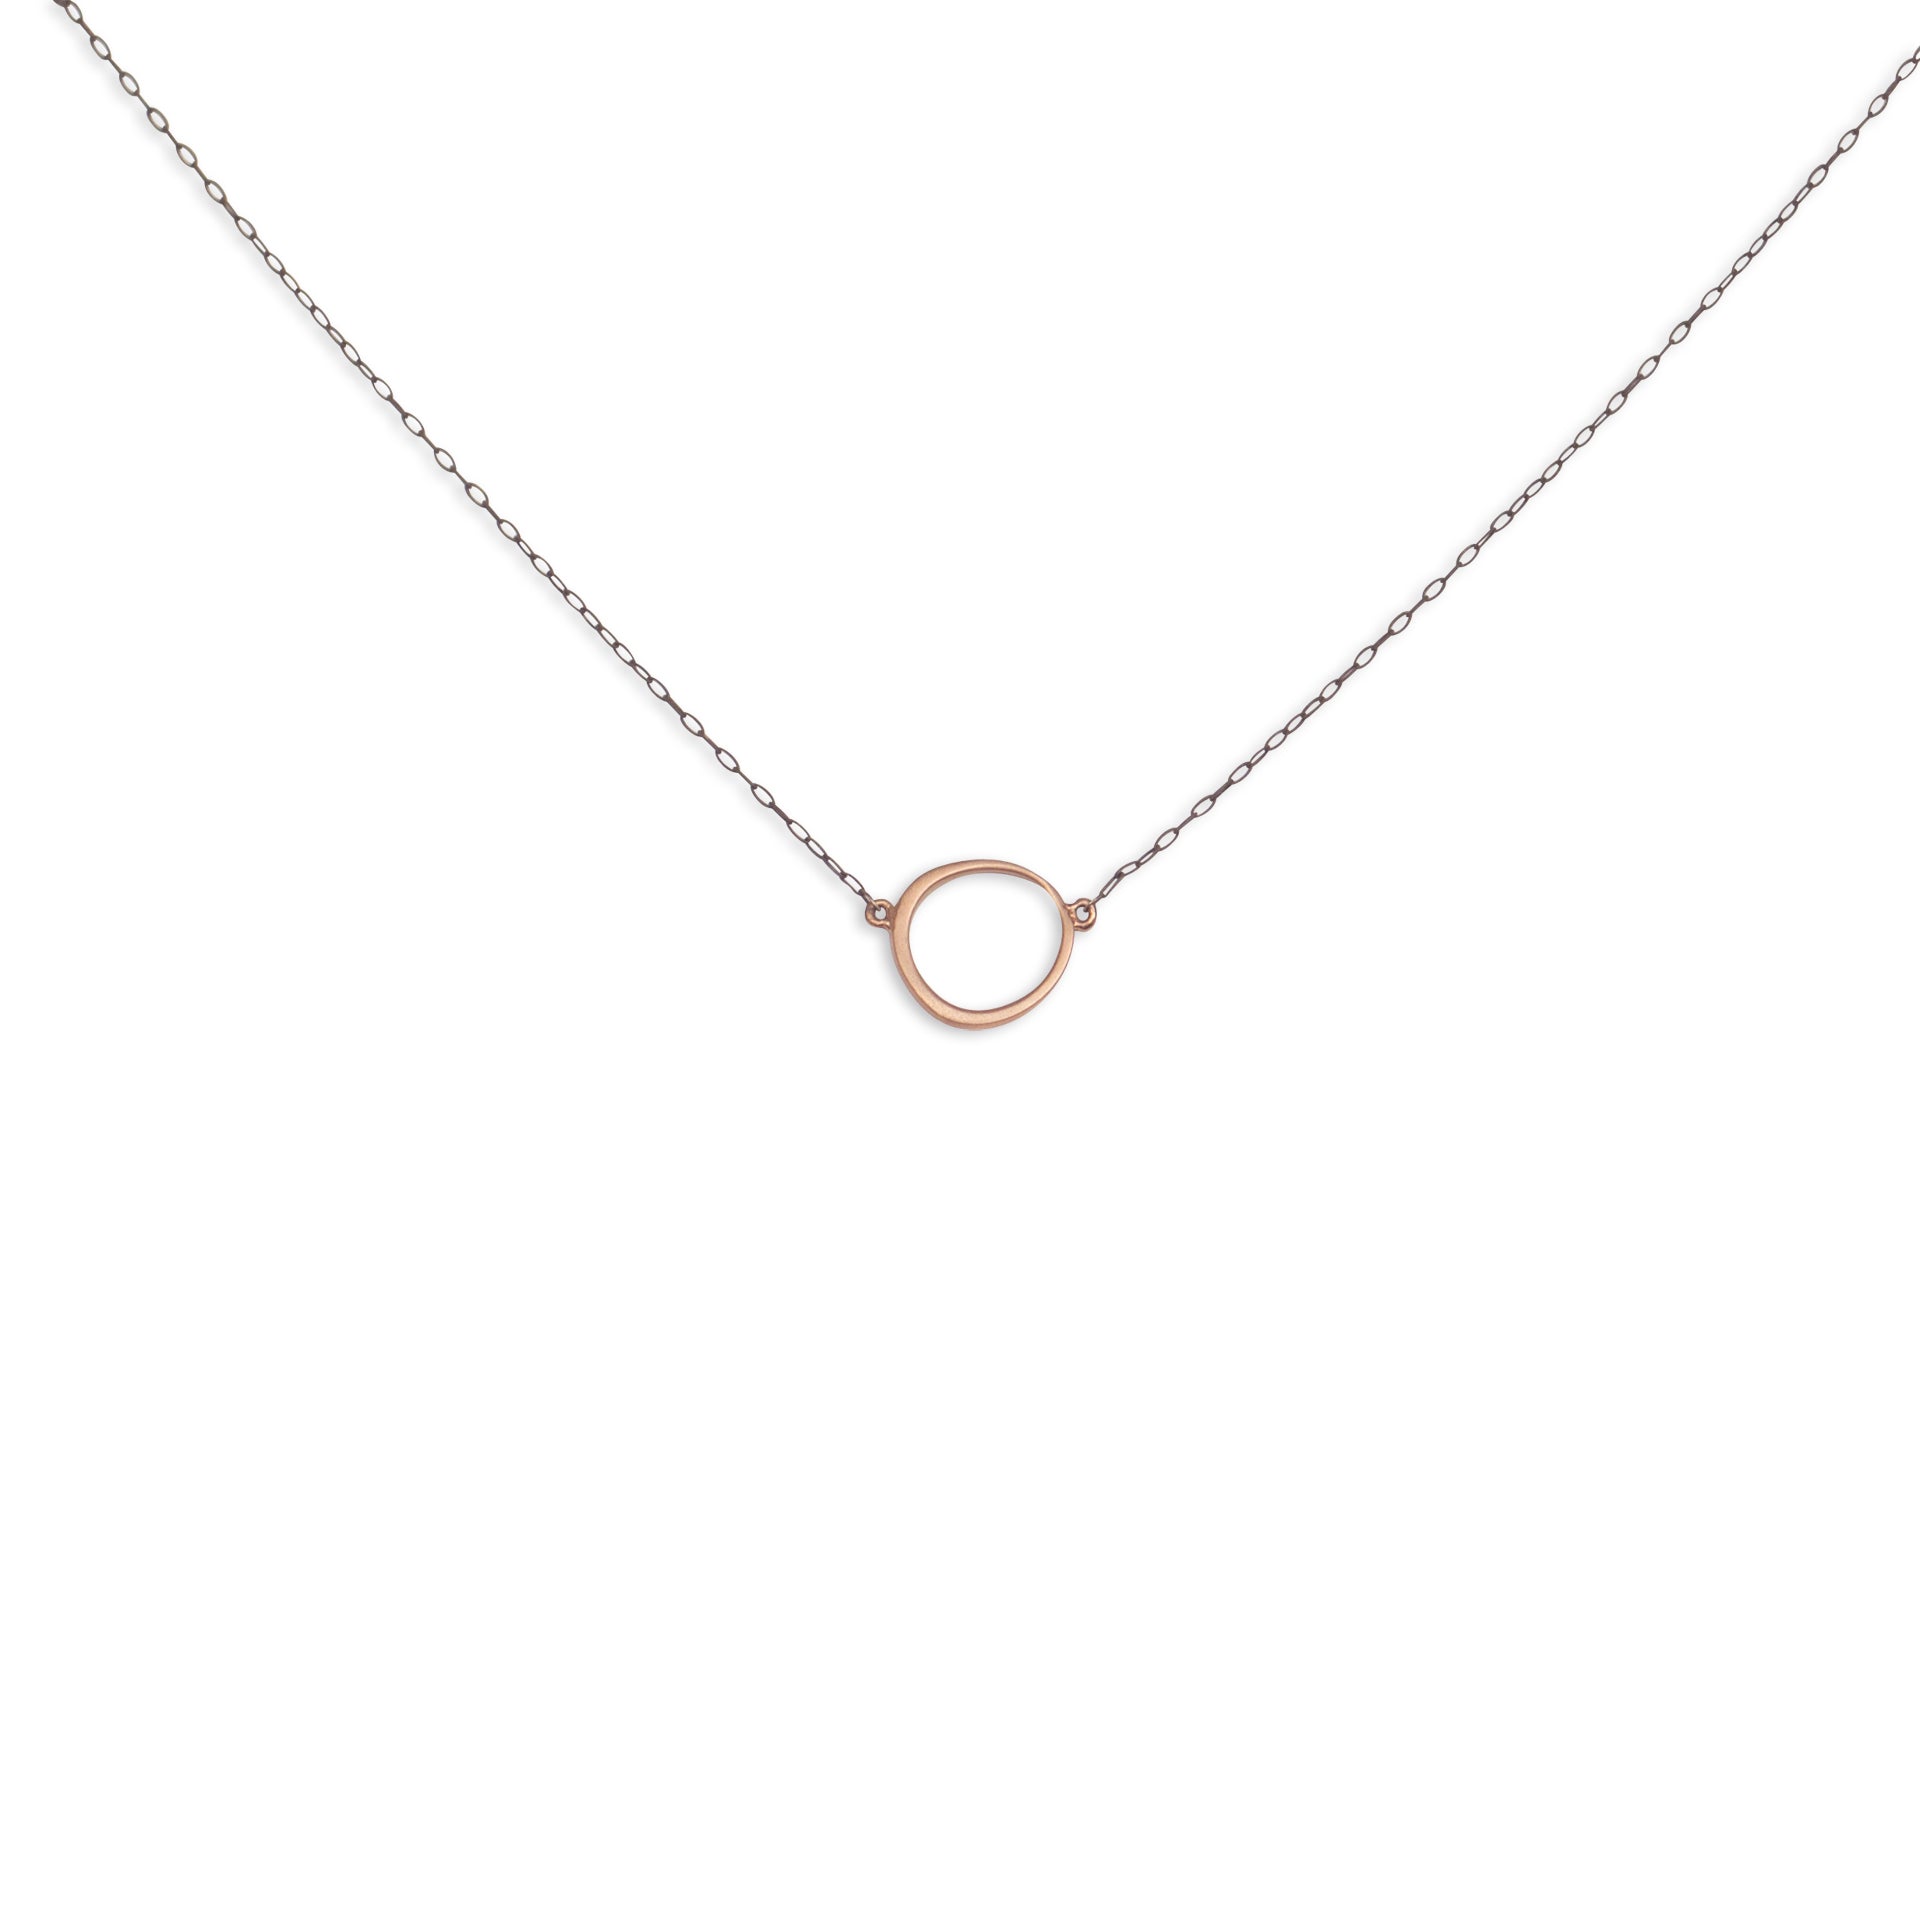 offset circle necklace – Marion Cage